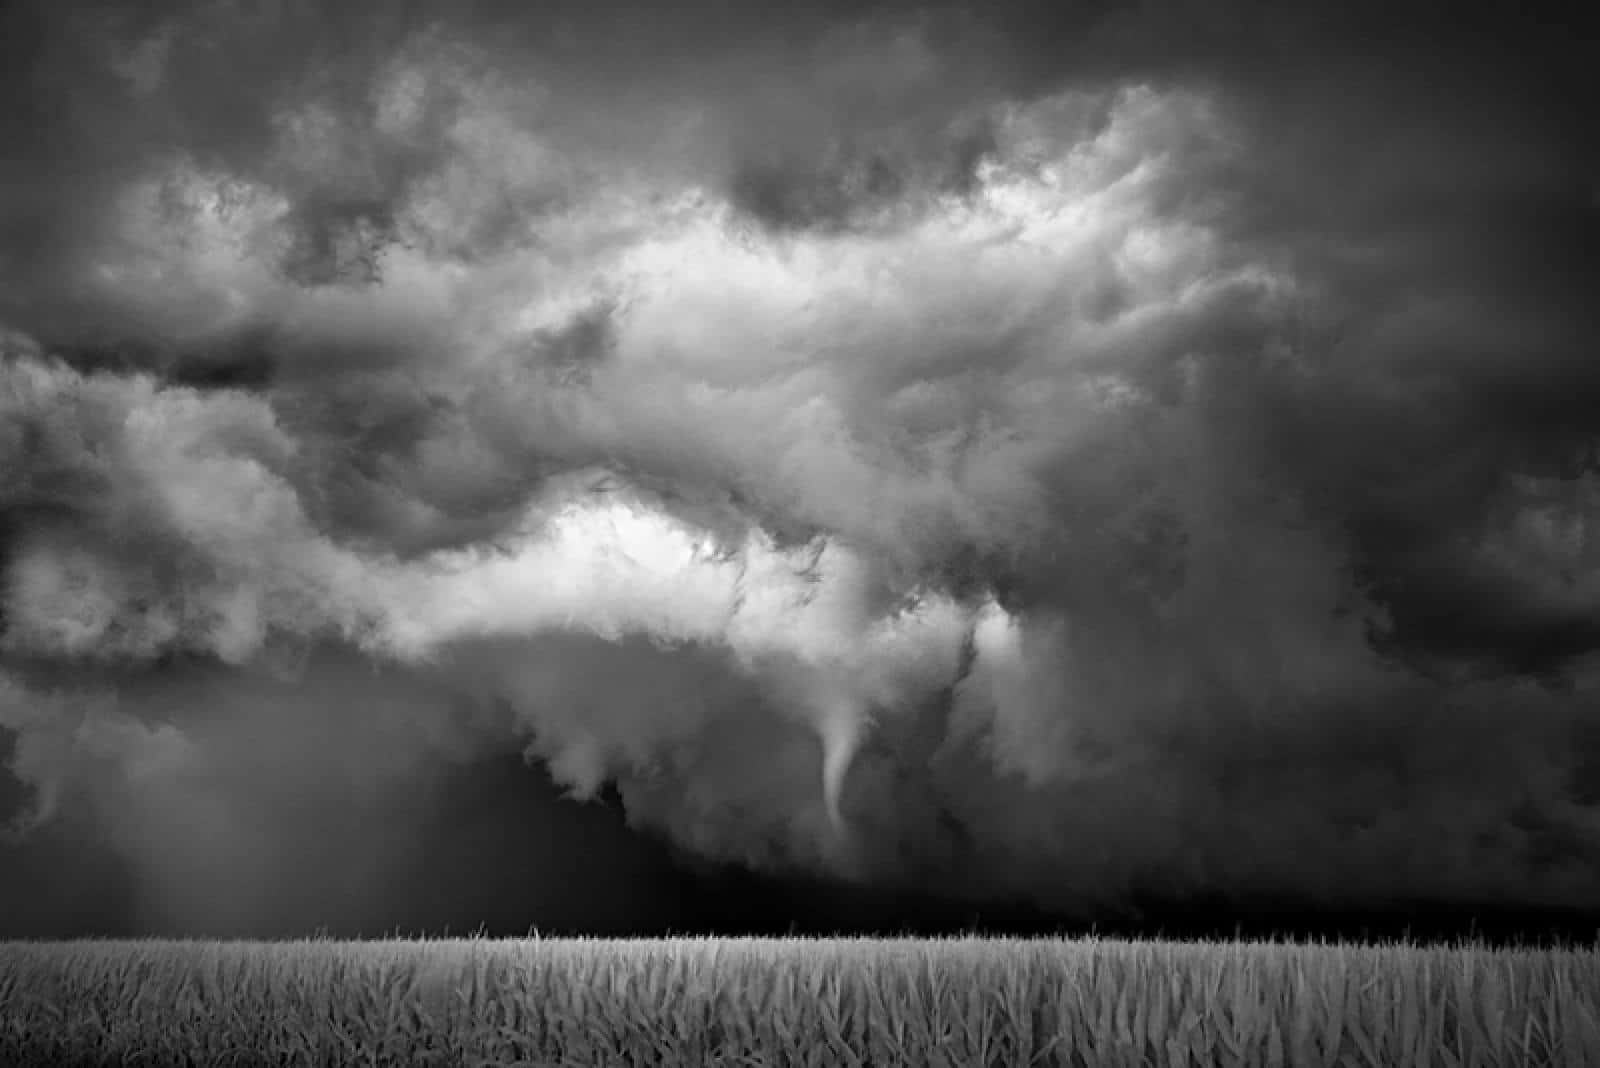 Dramatic black and white storm over an open field Wallpaper